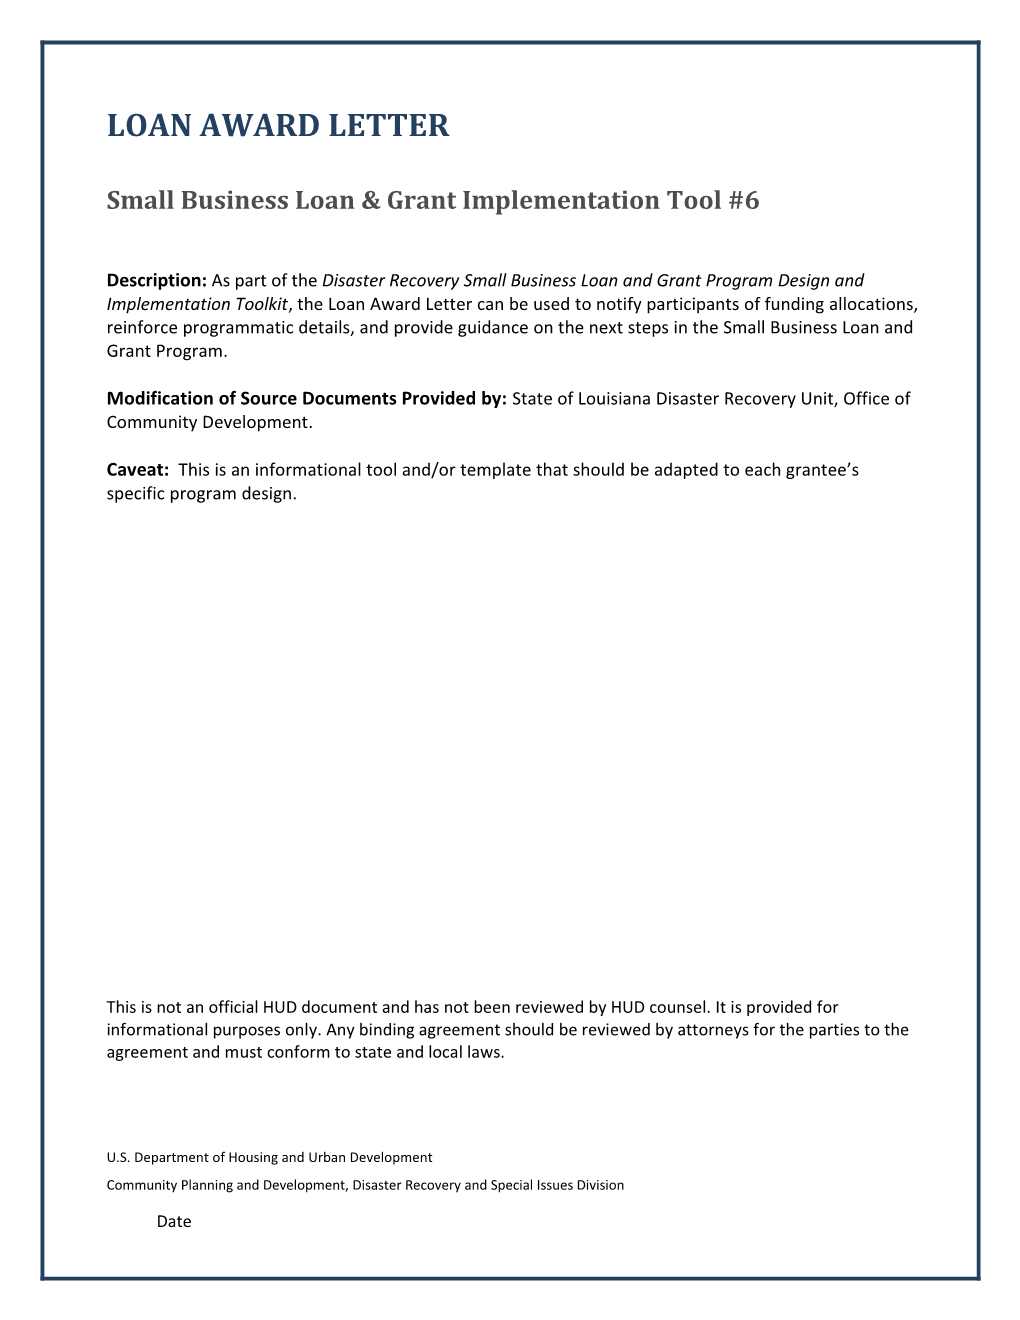 CDBG-DR Small Business Loan and Grant Loan Award Letter